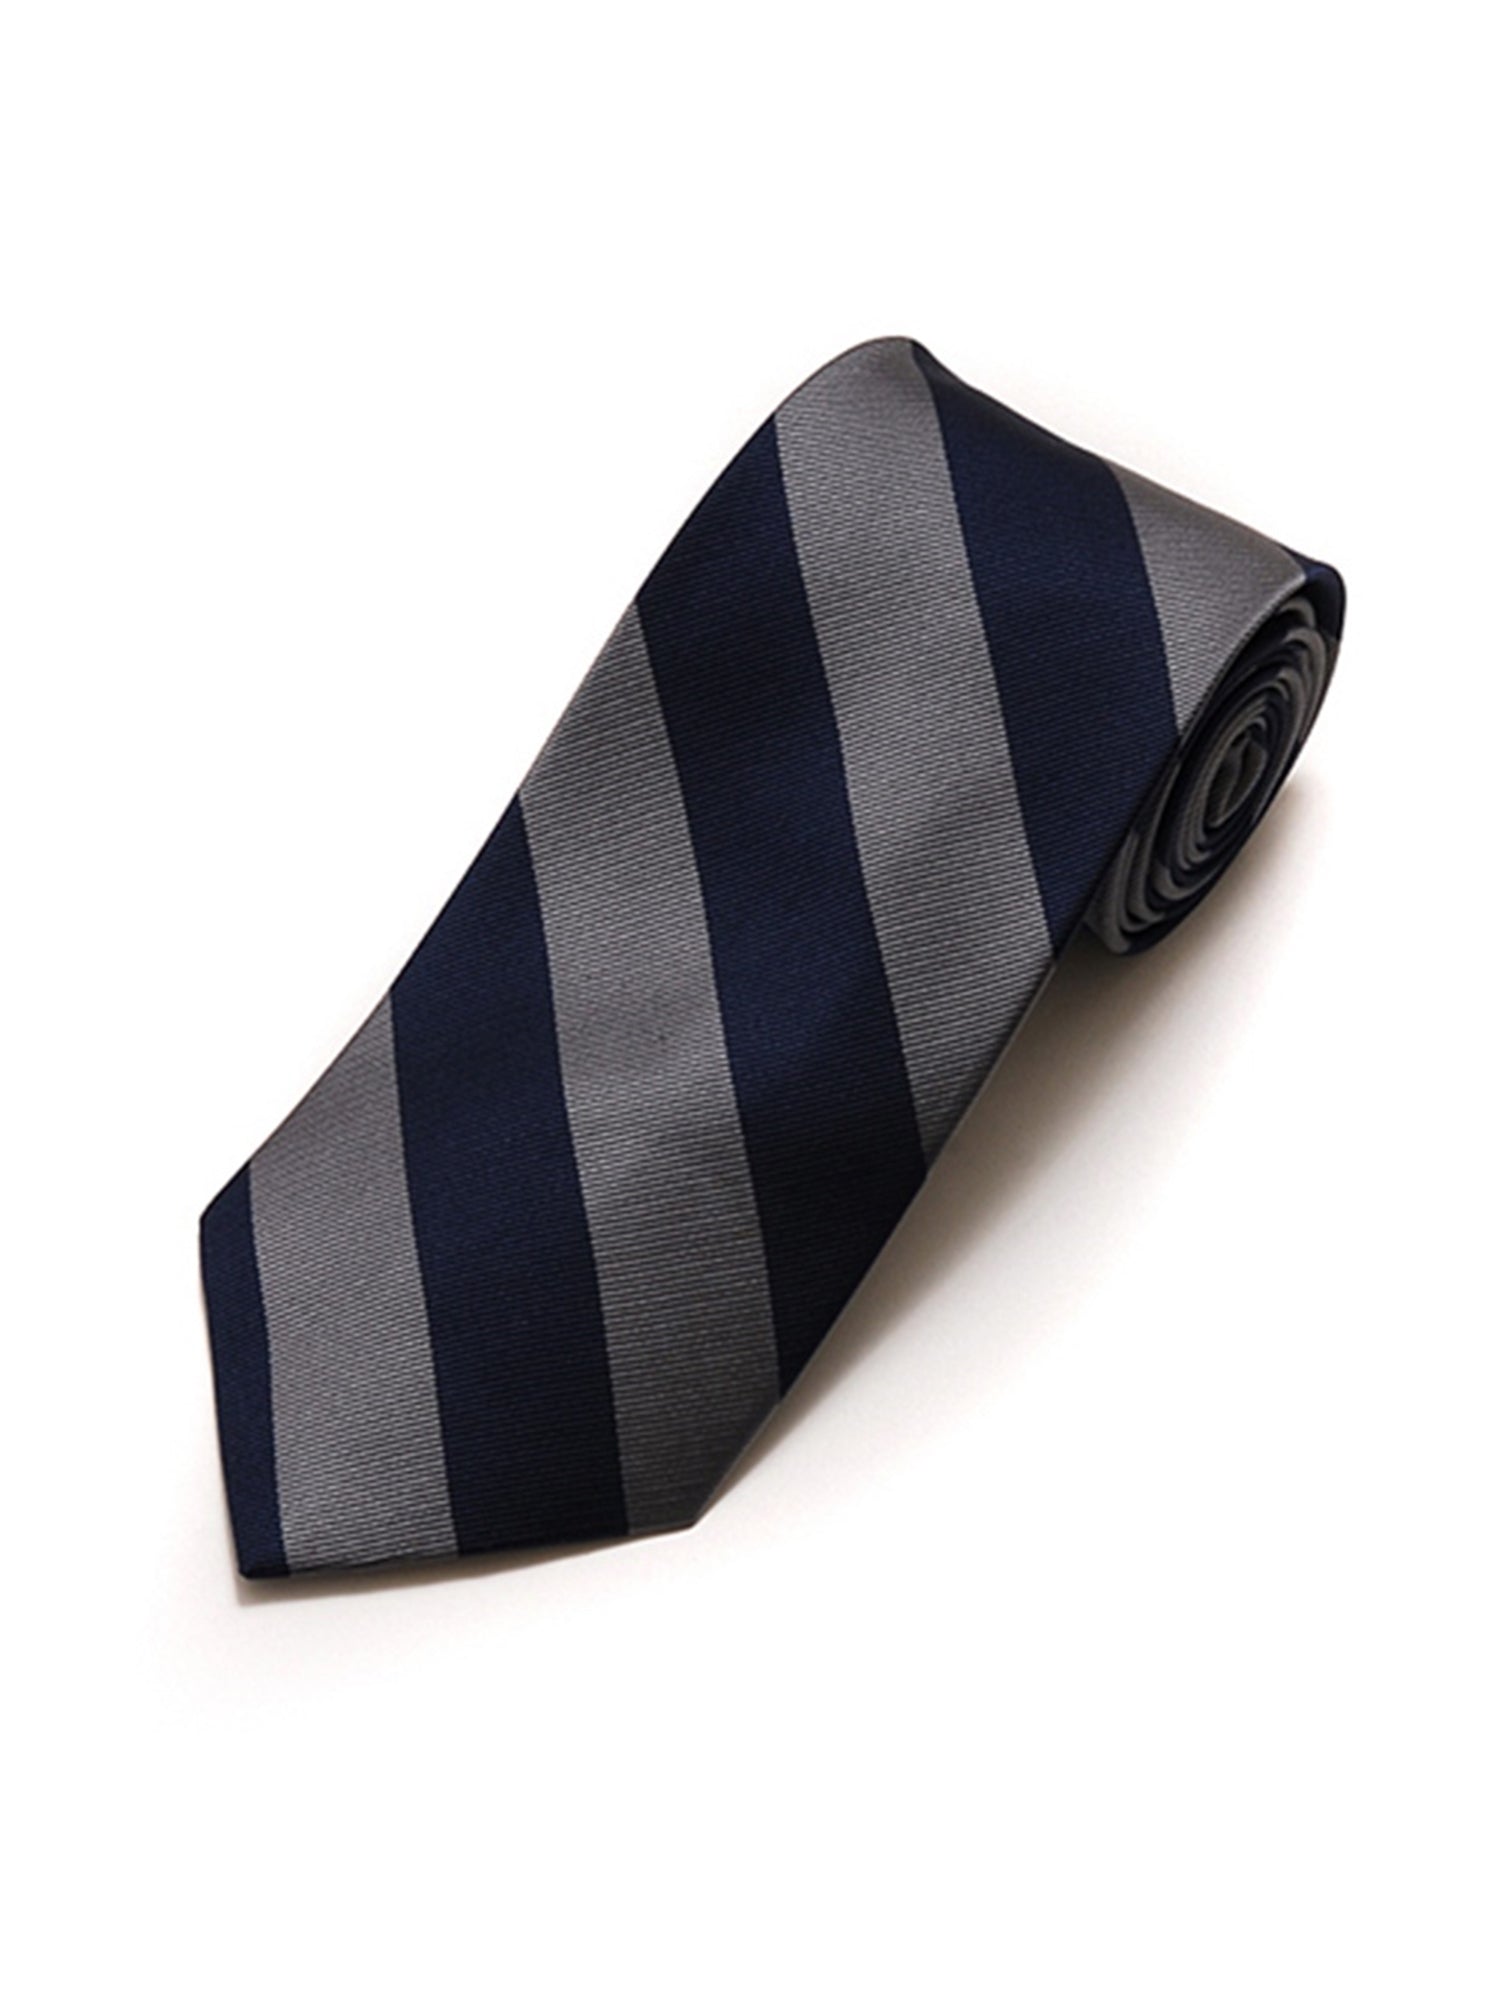 Men's College Striped Colored Silk Long Or X-Long Neck Tie Neck Tie TheDapperTie Navy & Charcoal 57" long & 3.25" wide 